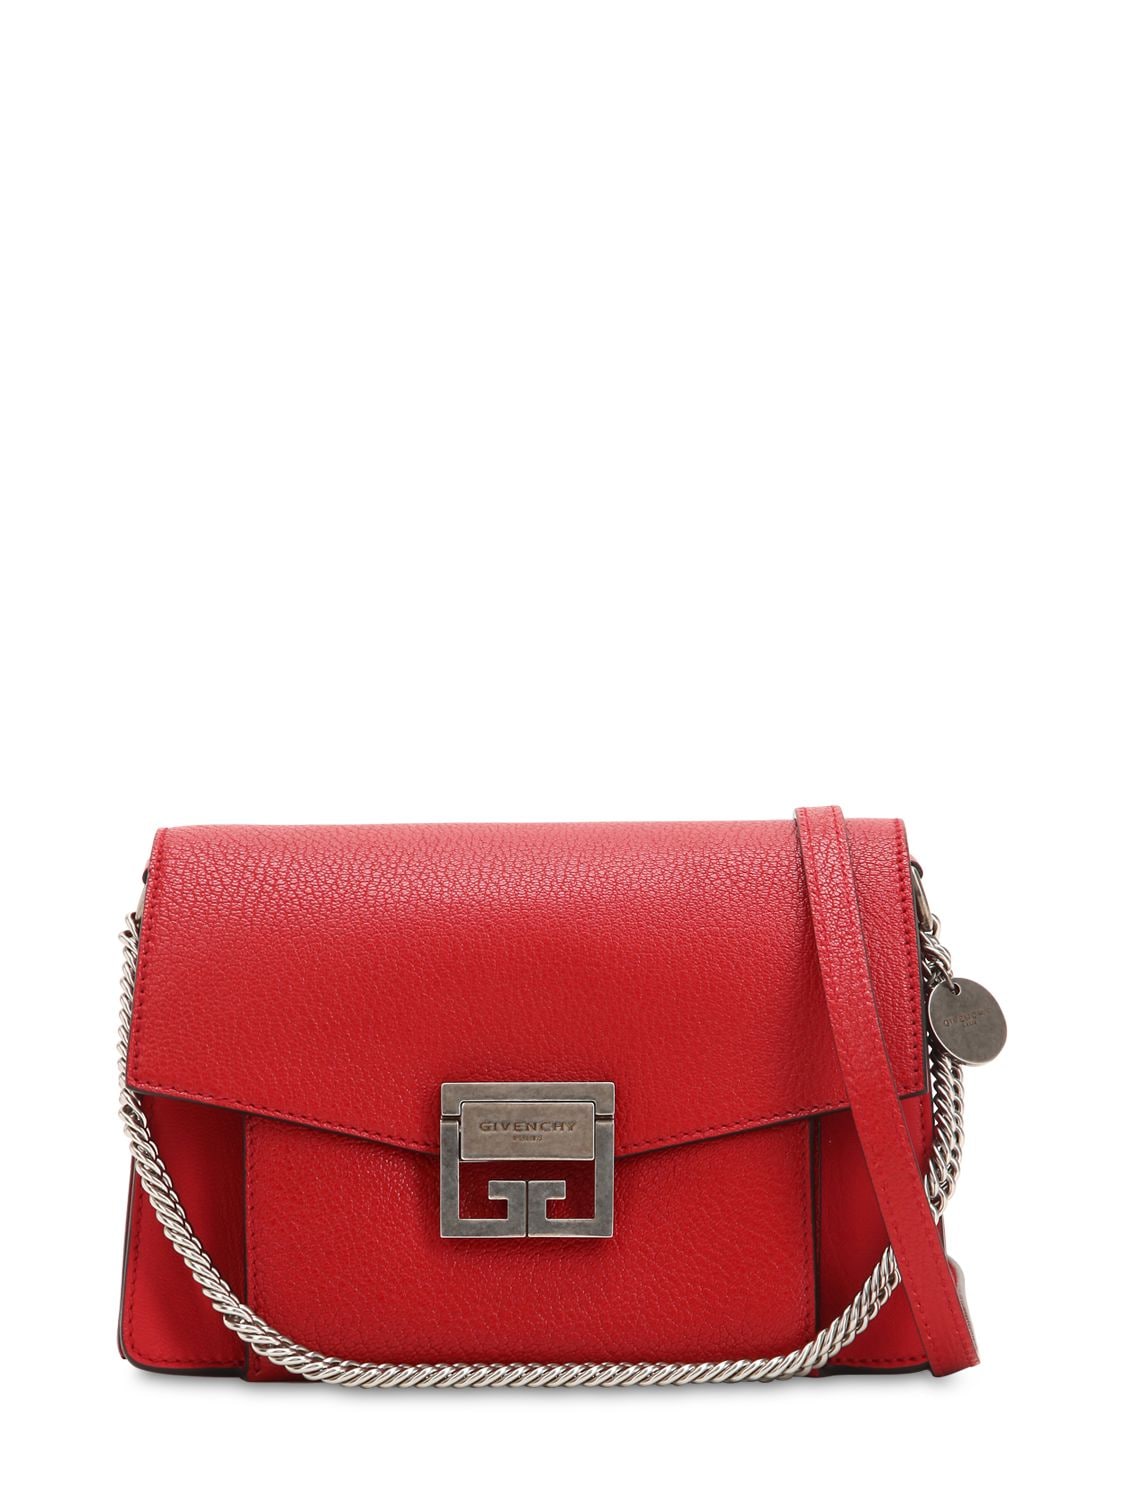 GIVENCHY SMALL GV3 GRAINED LEATHER SHOULDER BAG,68IA5P003-NjIw0